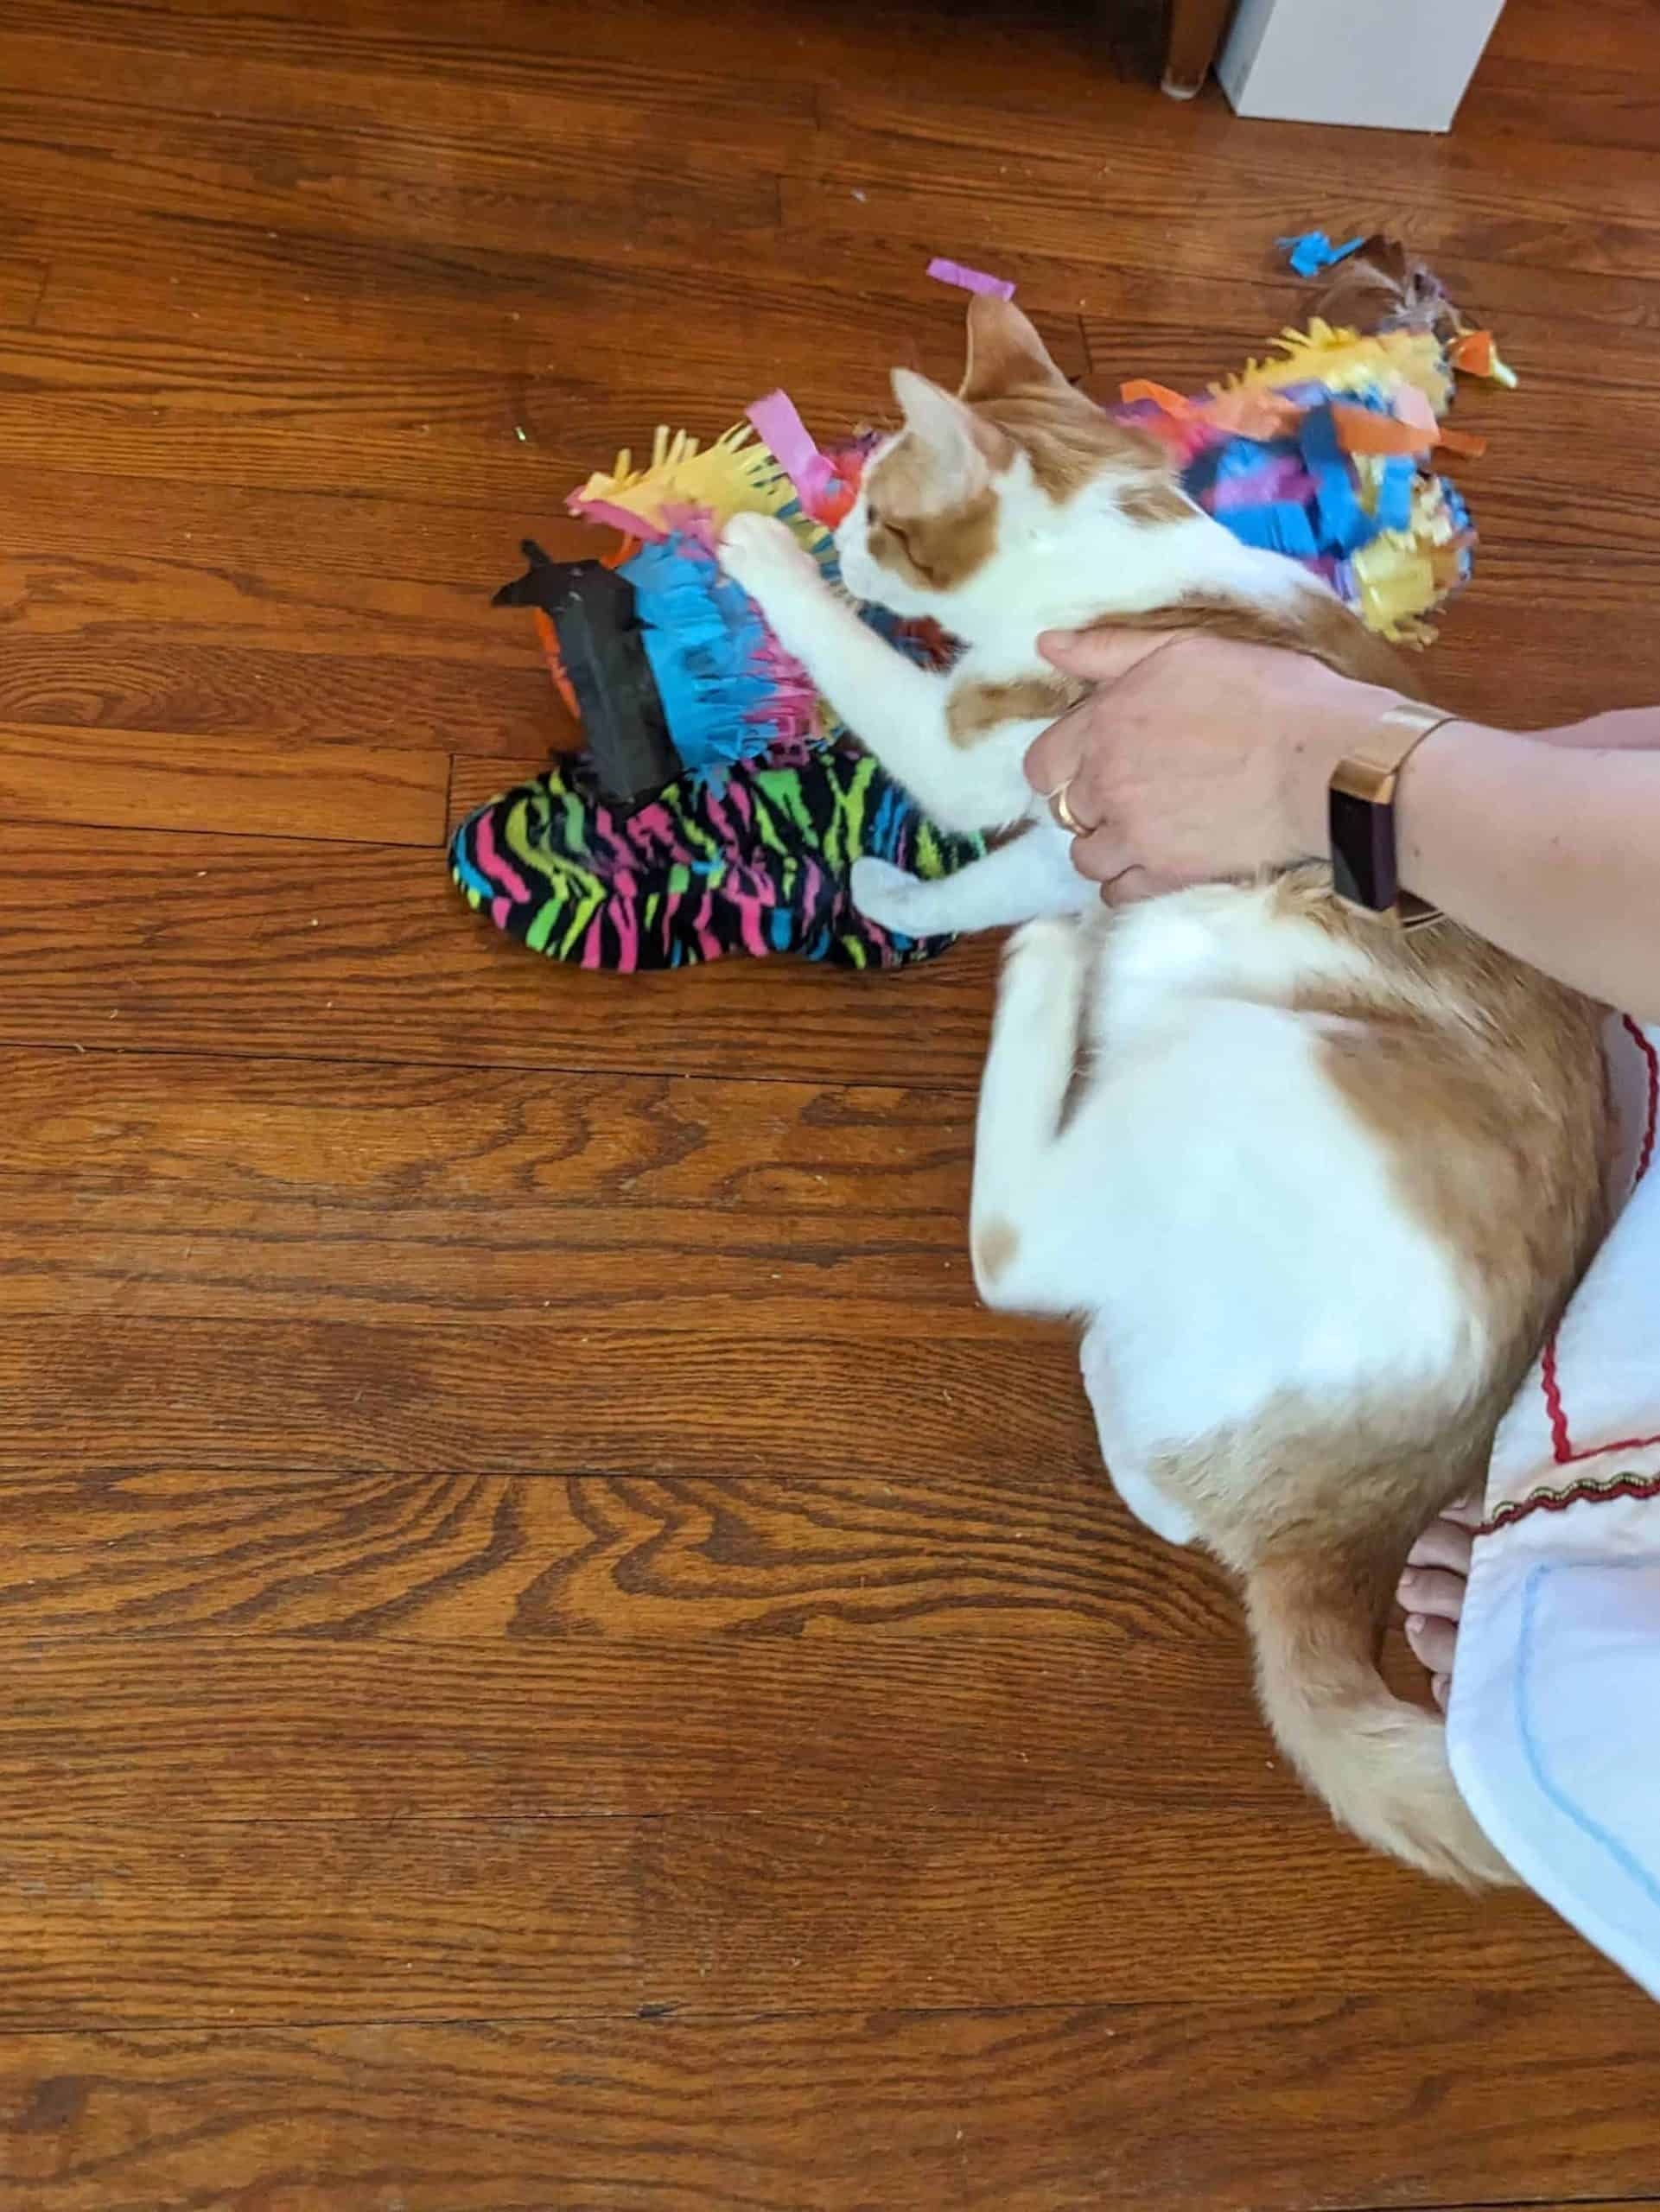 Orange and White Cat being rescued from getting stuck in a pinata